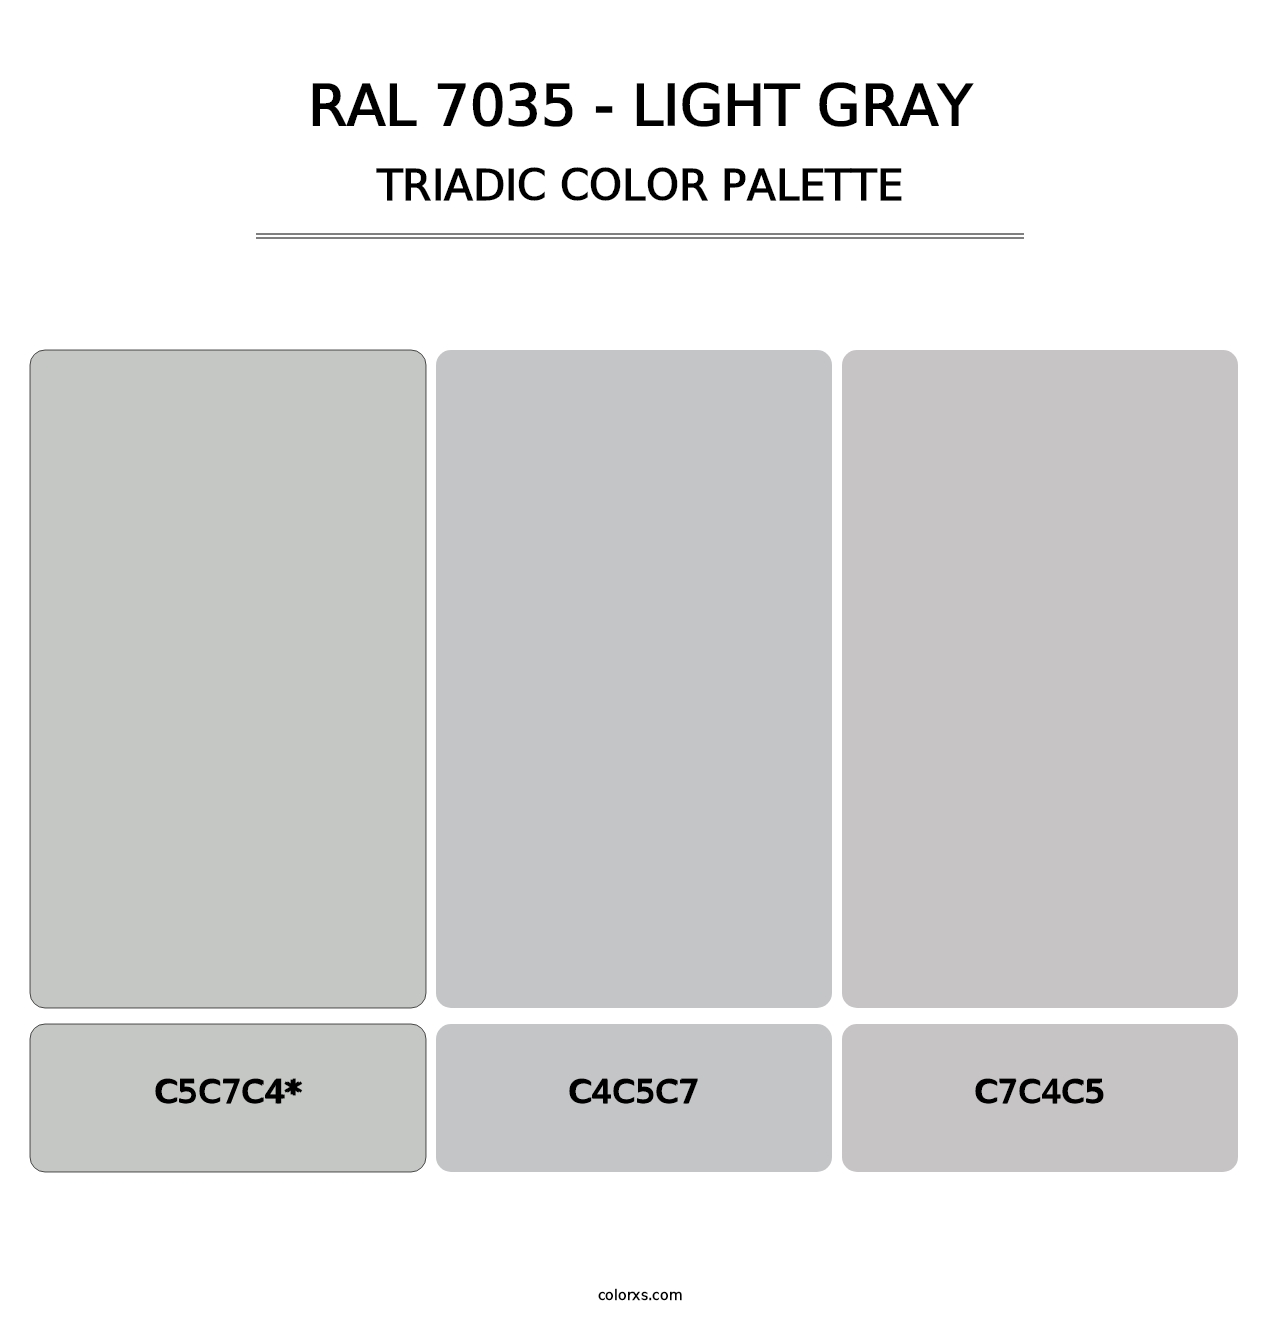 RAL 7035 - Light Gray - Triadic Color Palette